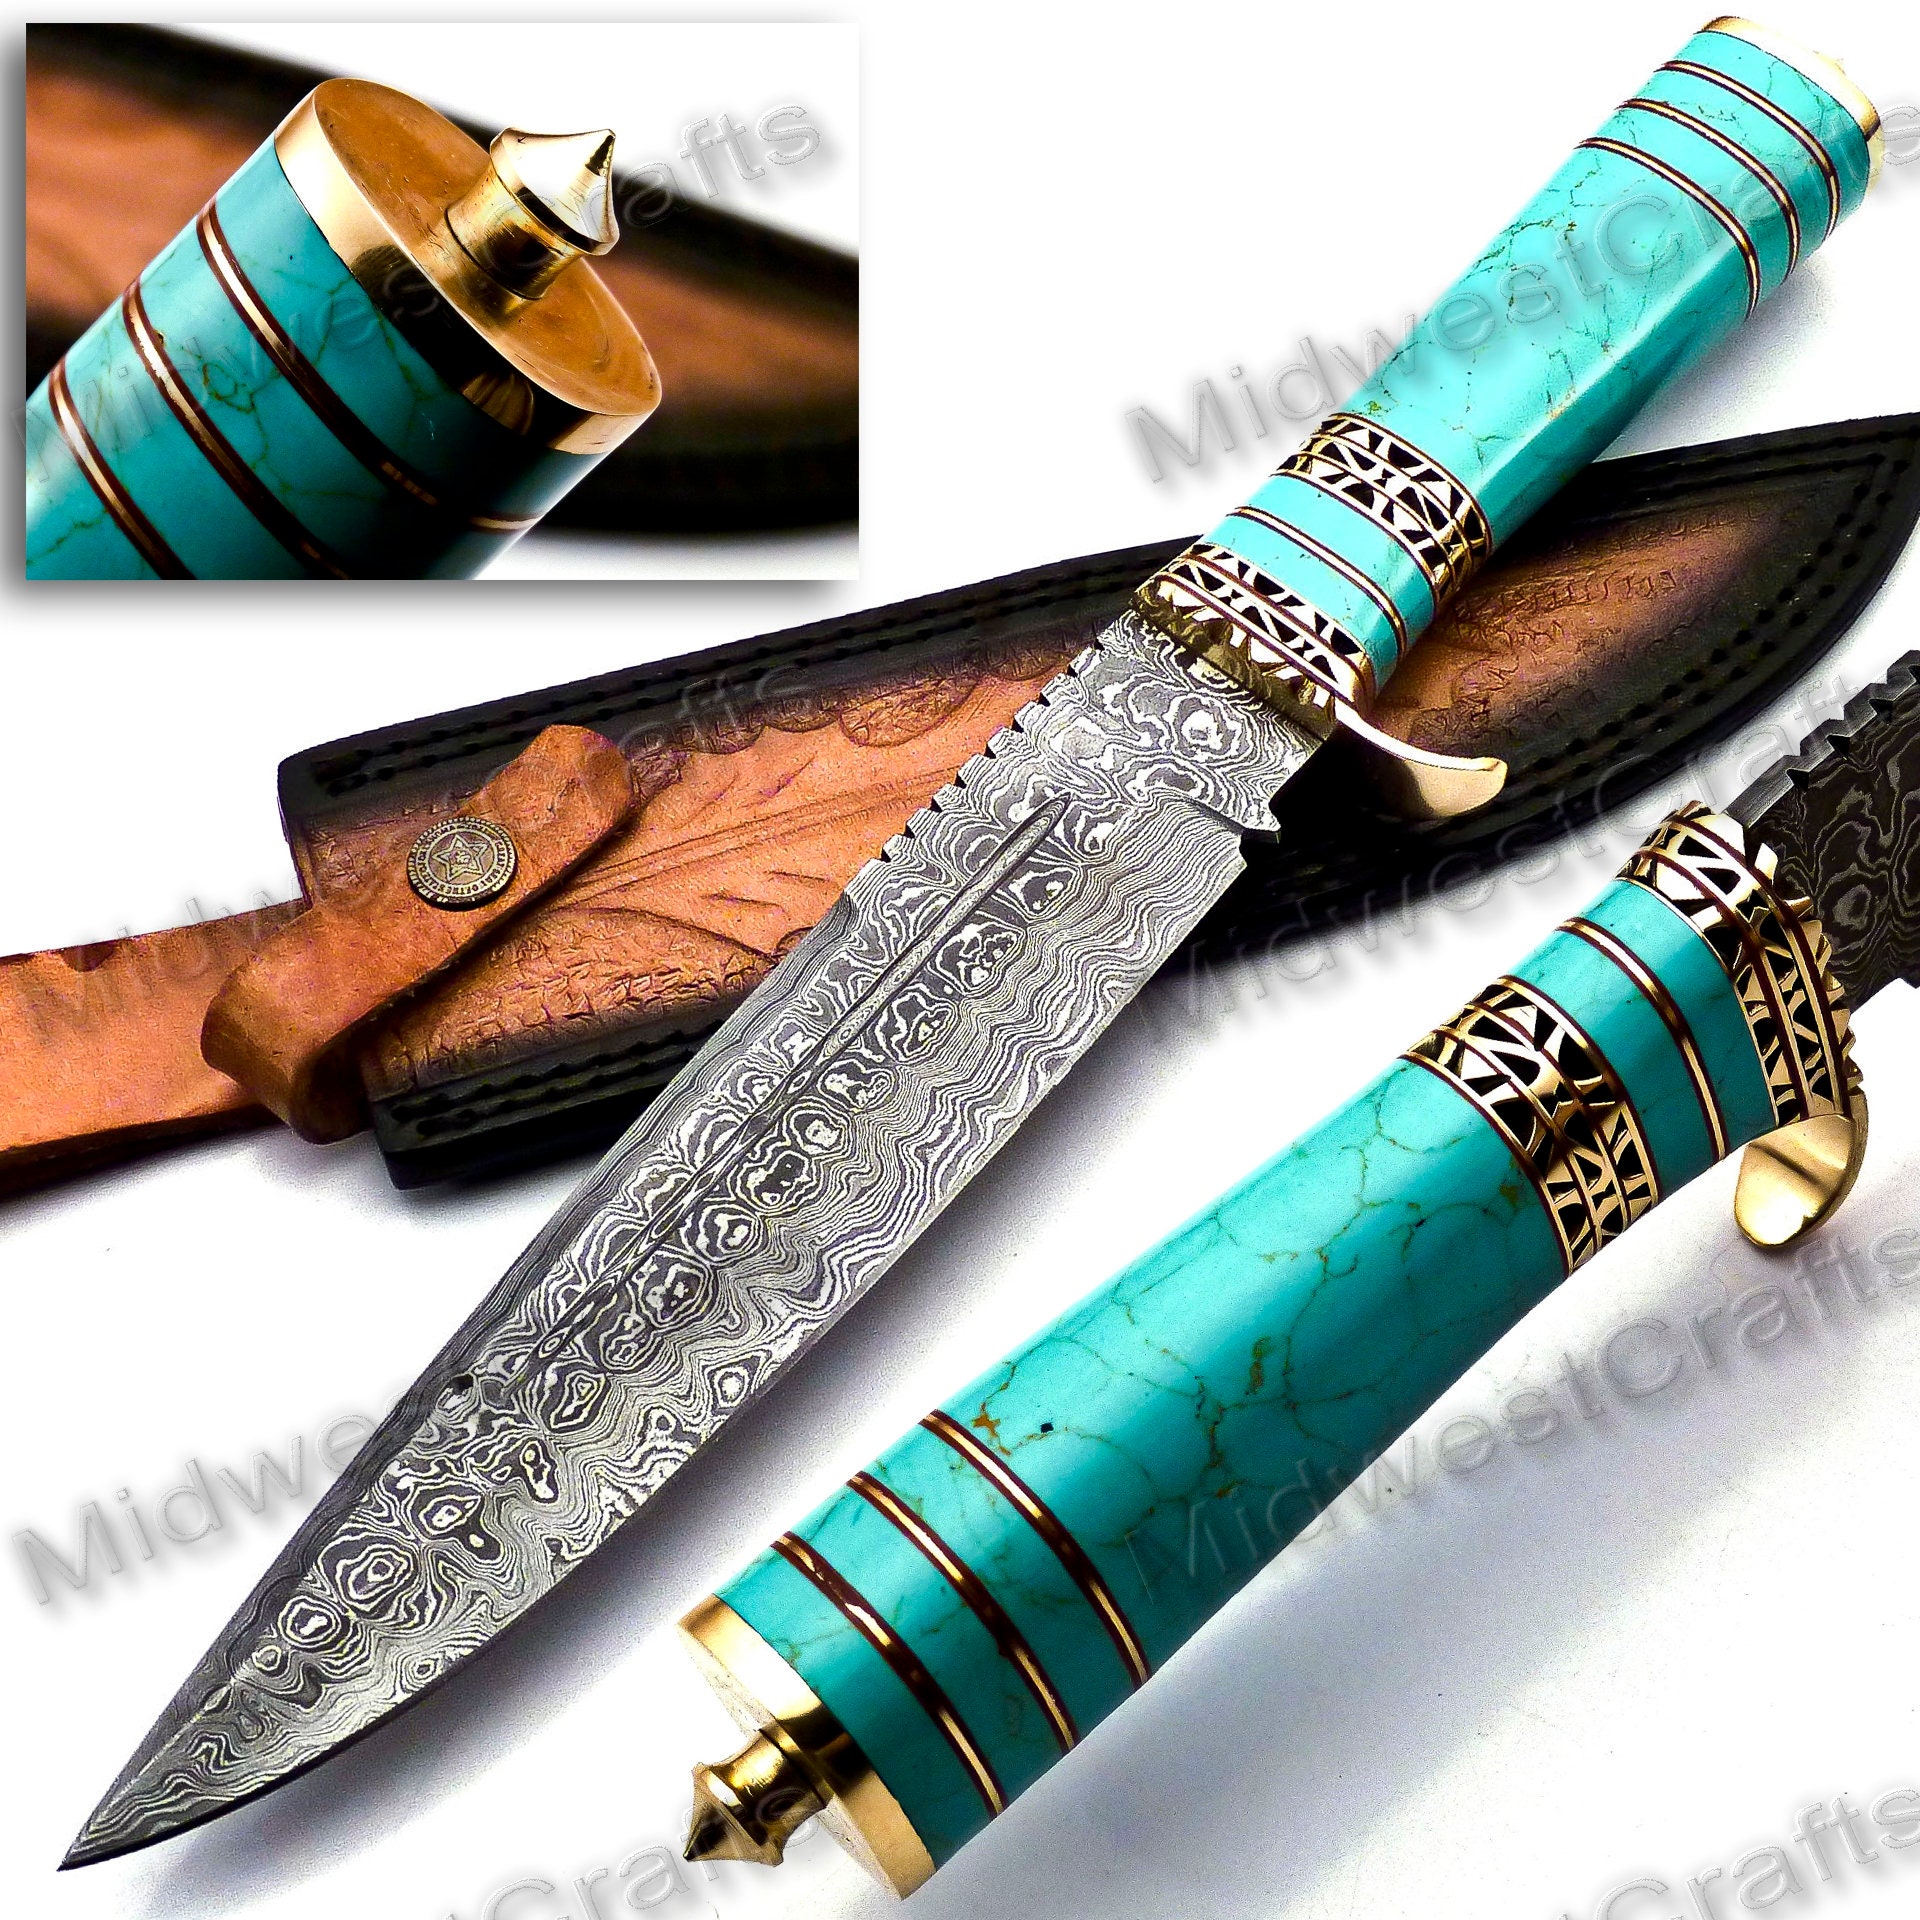 X-Acto/House of Miniatures Knife Indiana Collectible Knives for sale